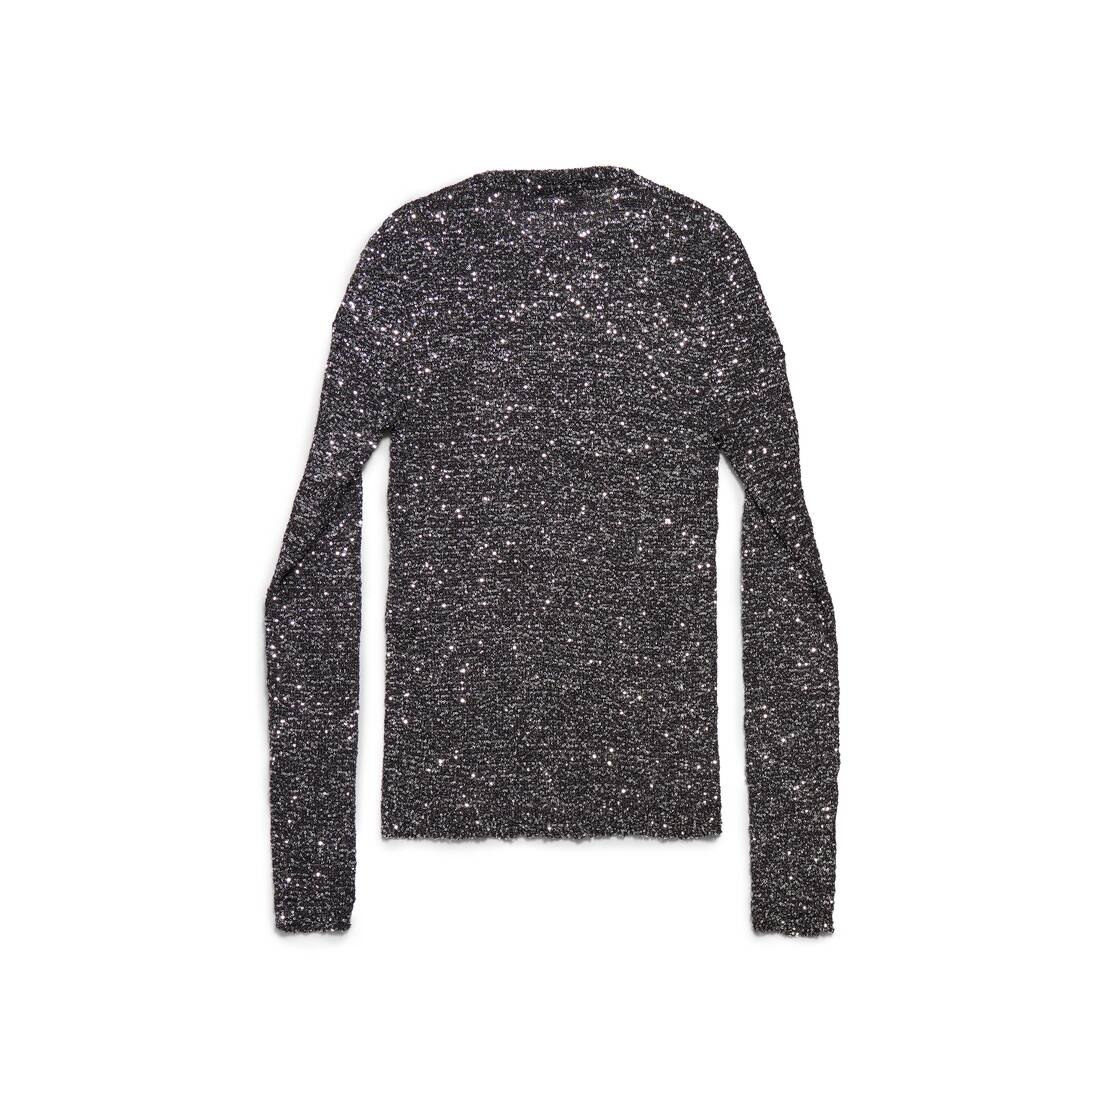 Women's Fitted Sweater in Black - 2